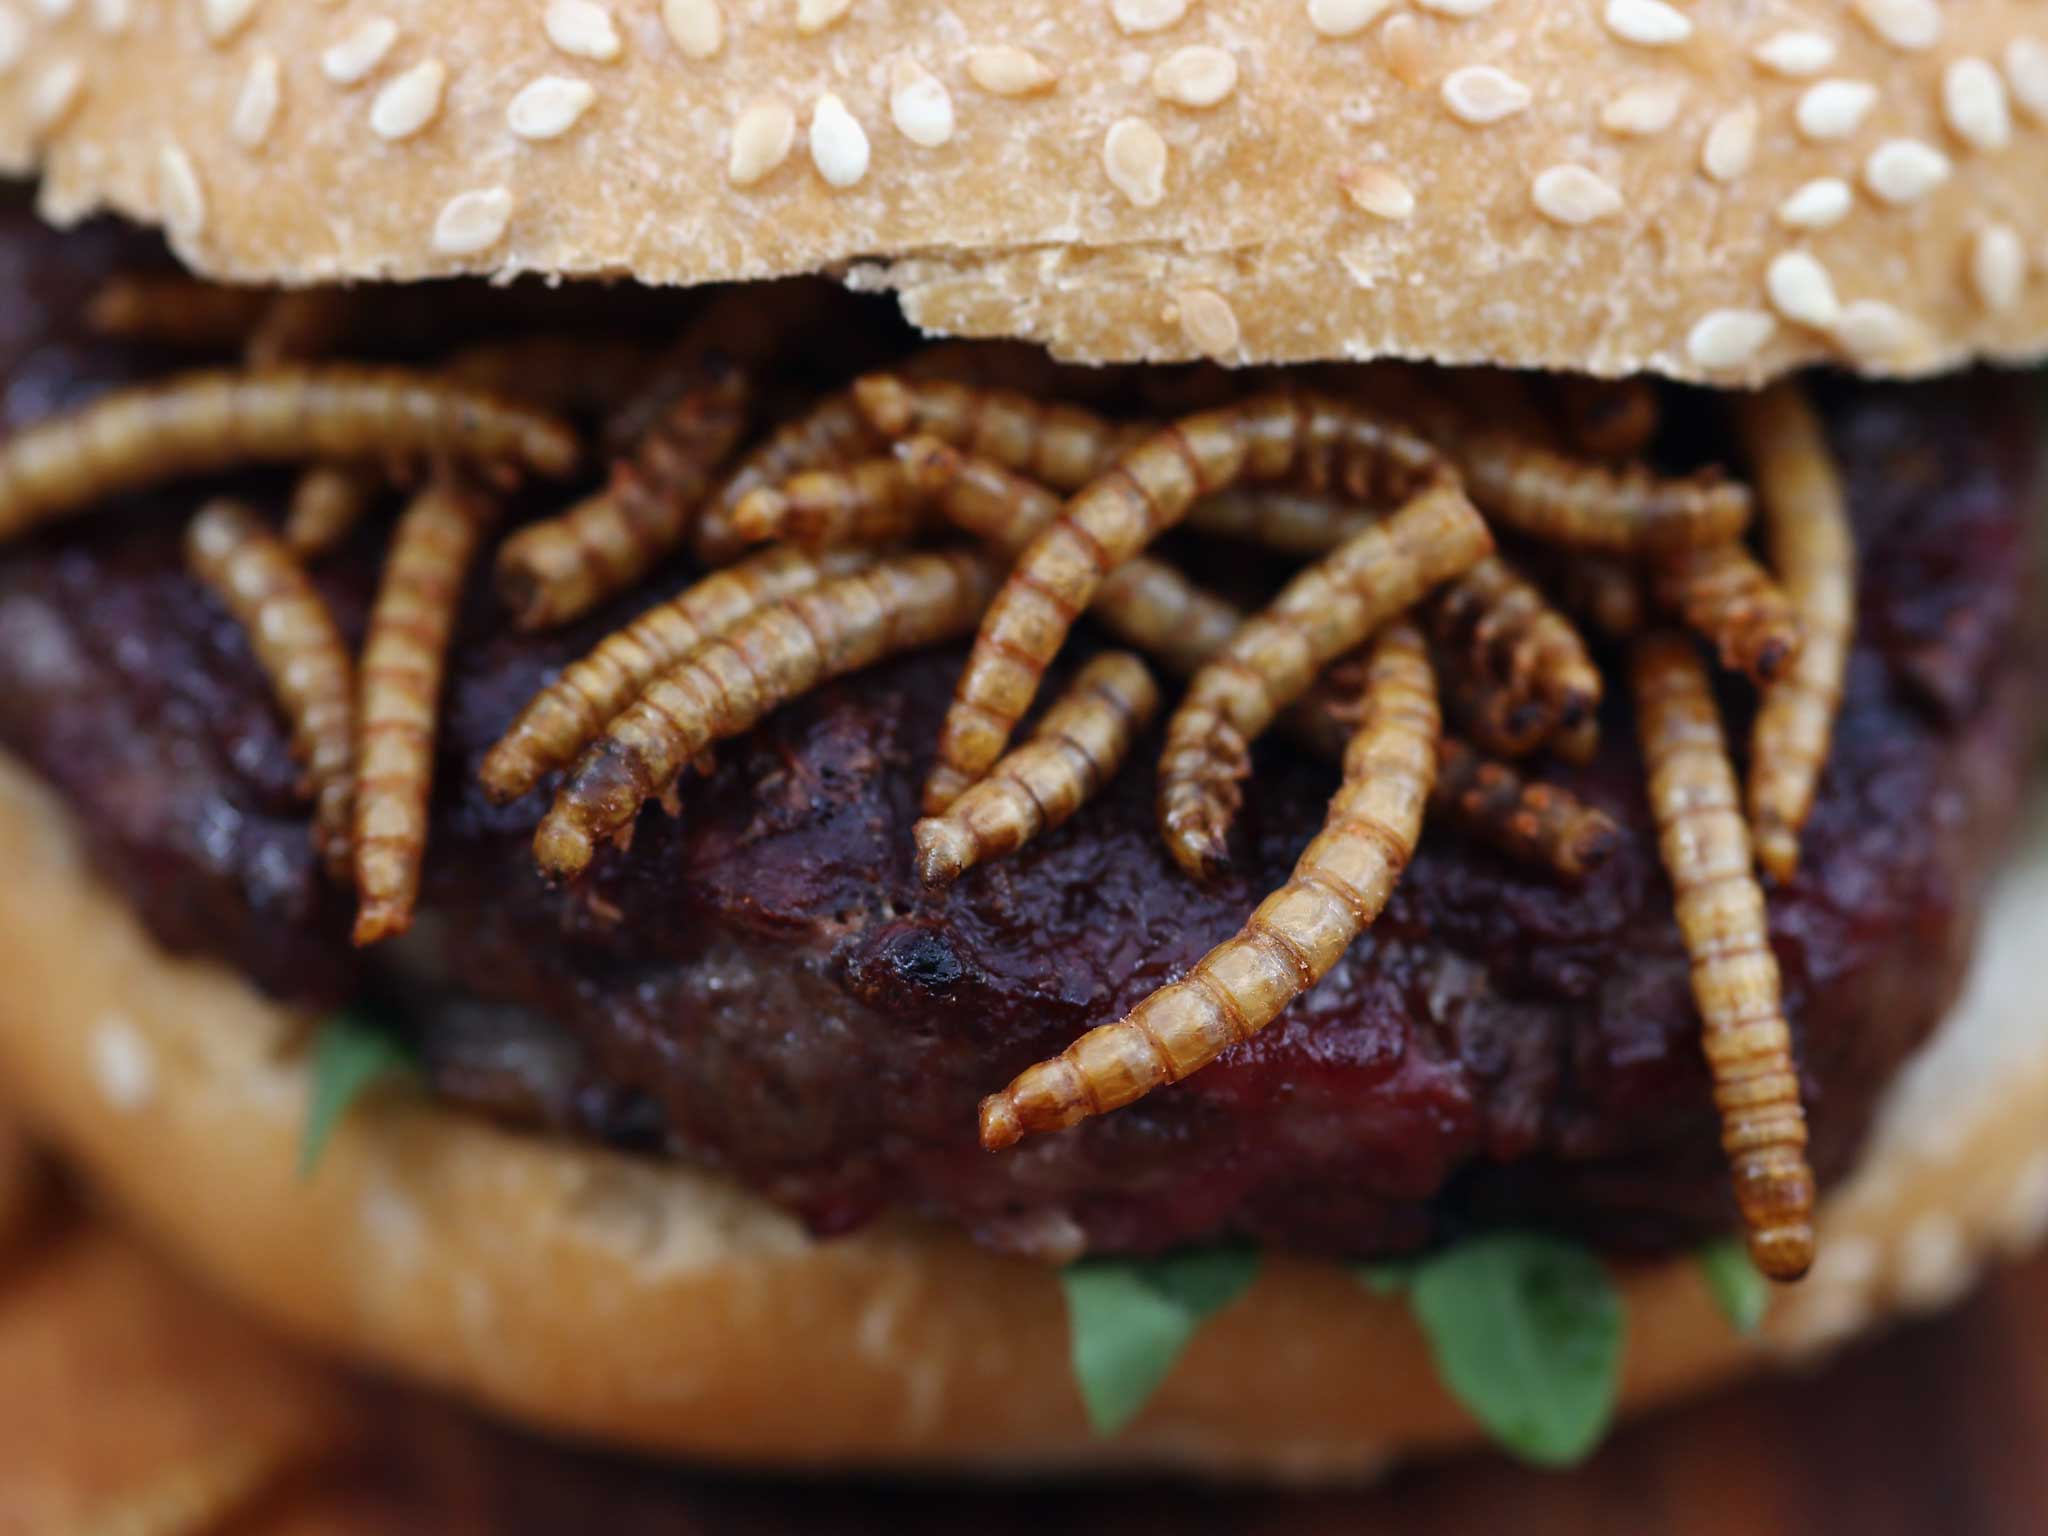 A pigeon burger with mealworms at the 'pop up' stand at One New Change